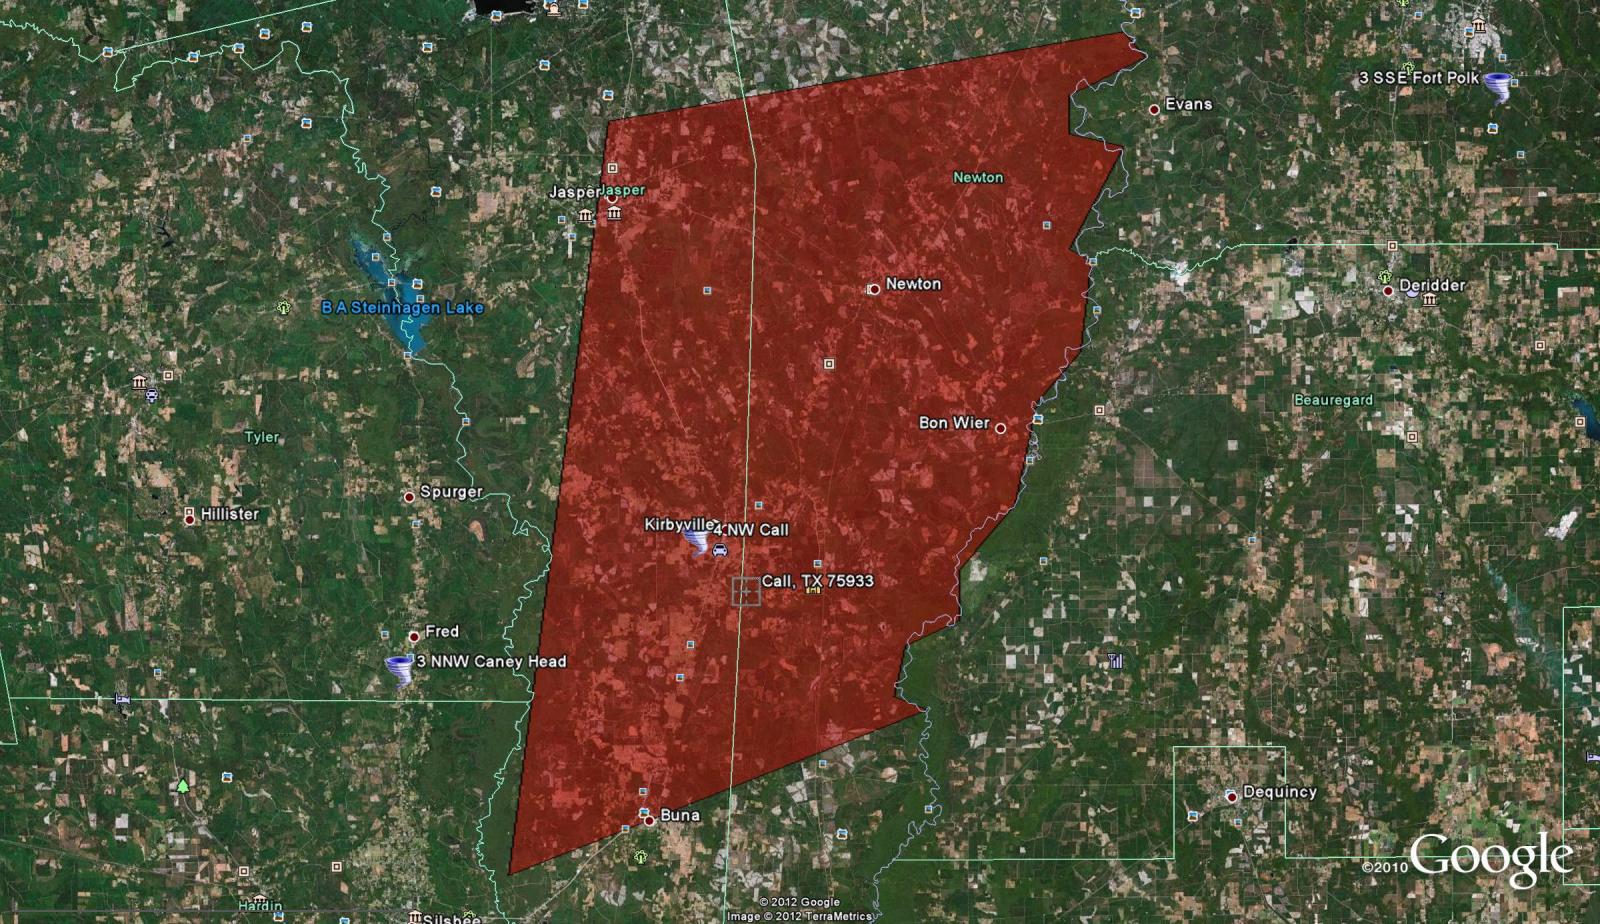 January 25 Outbreak image - click for larger version